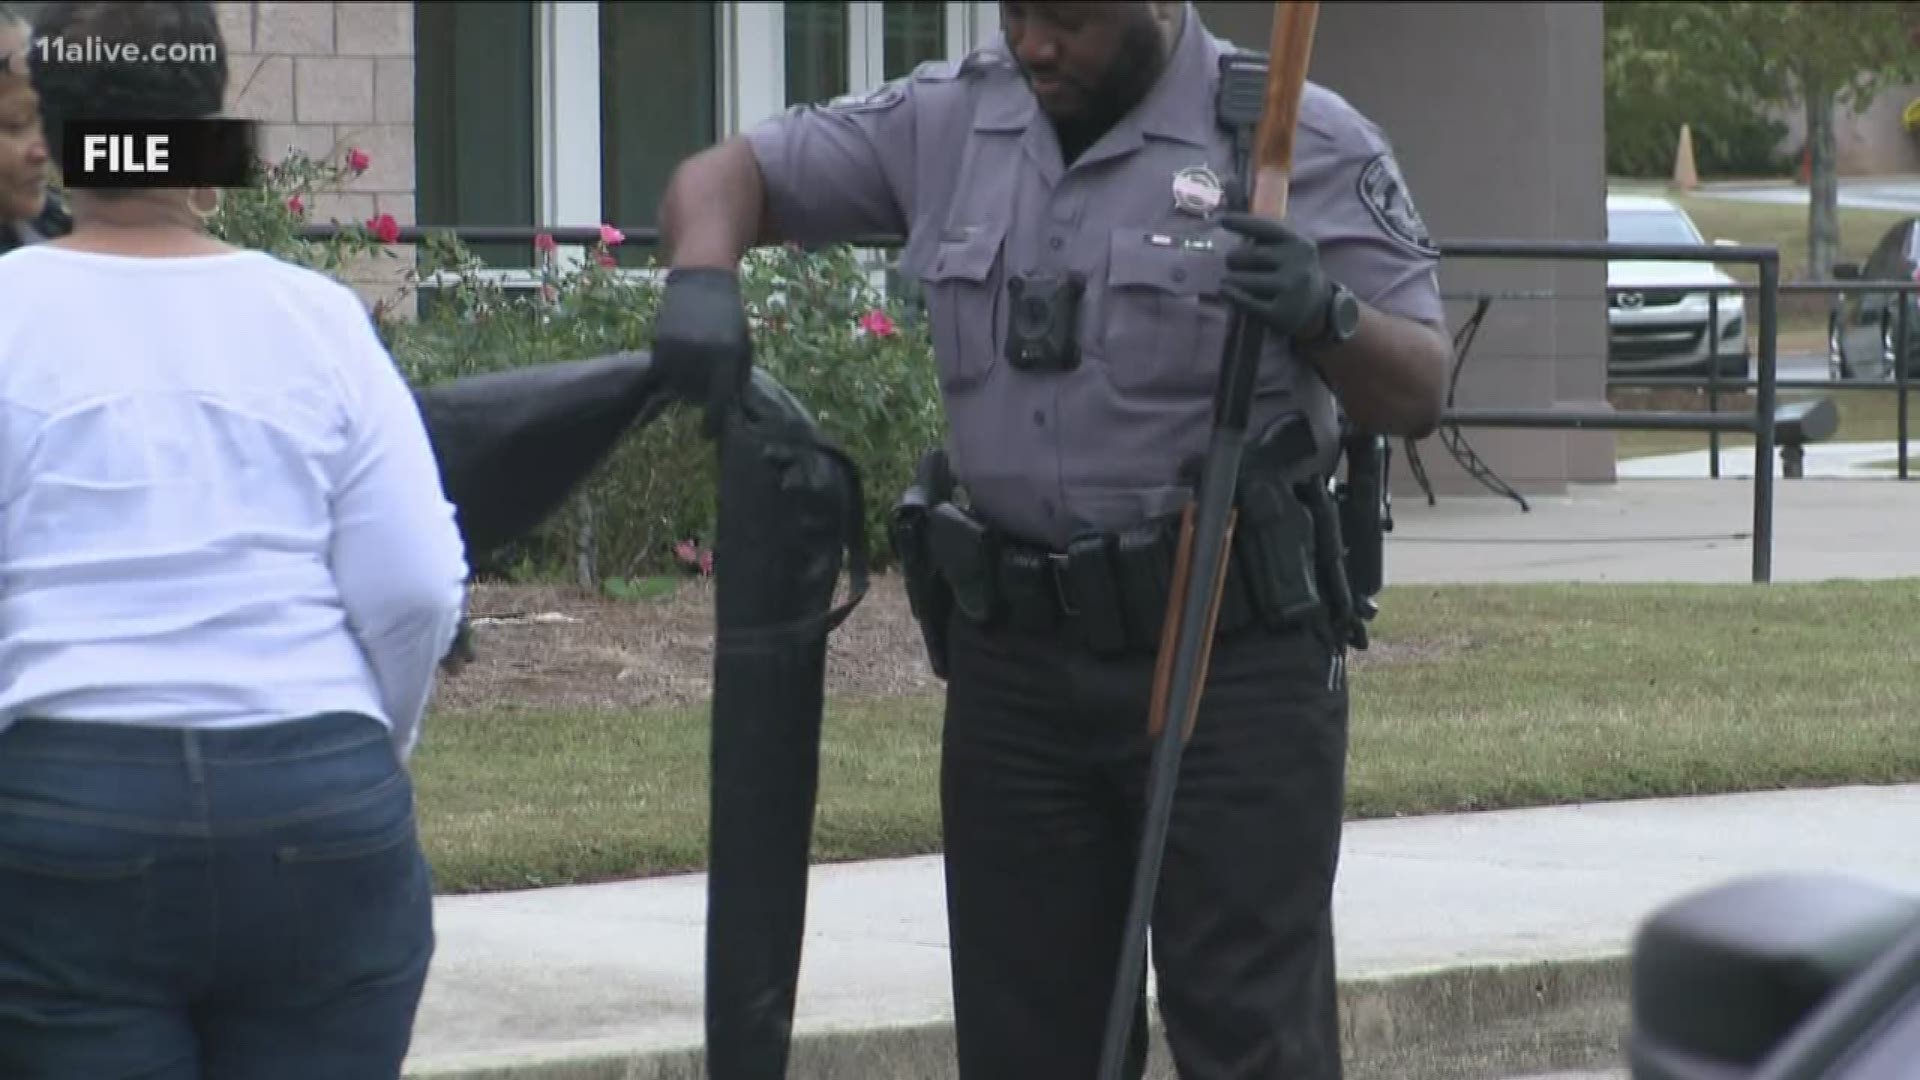 Springhill Baptist Church has partnered with the Rockdale County Sheriff's Office and hopes the program helps get guns off the street.